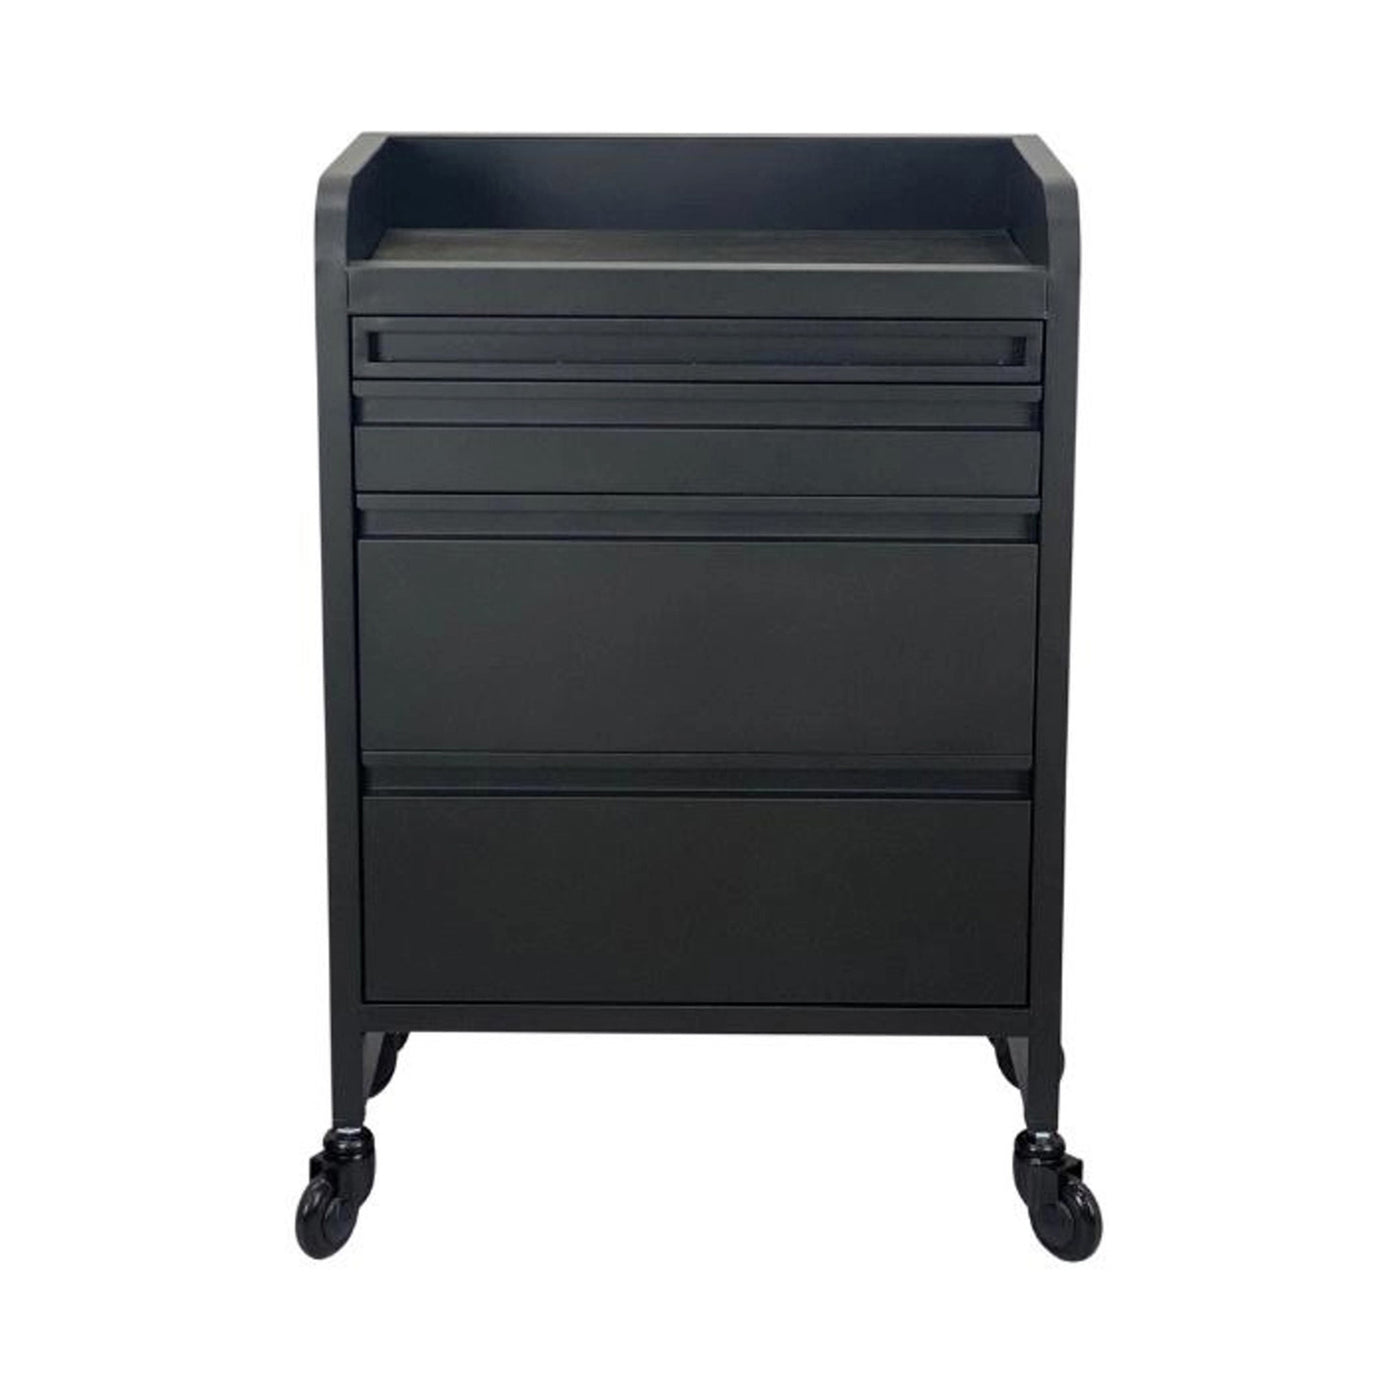 Joiken Fusion Plus 4 Drawer Hairdressing Beauty Trolley - Black front view